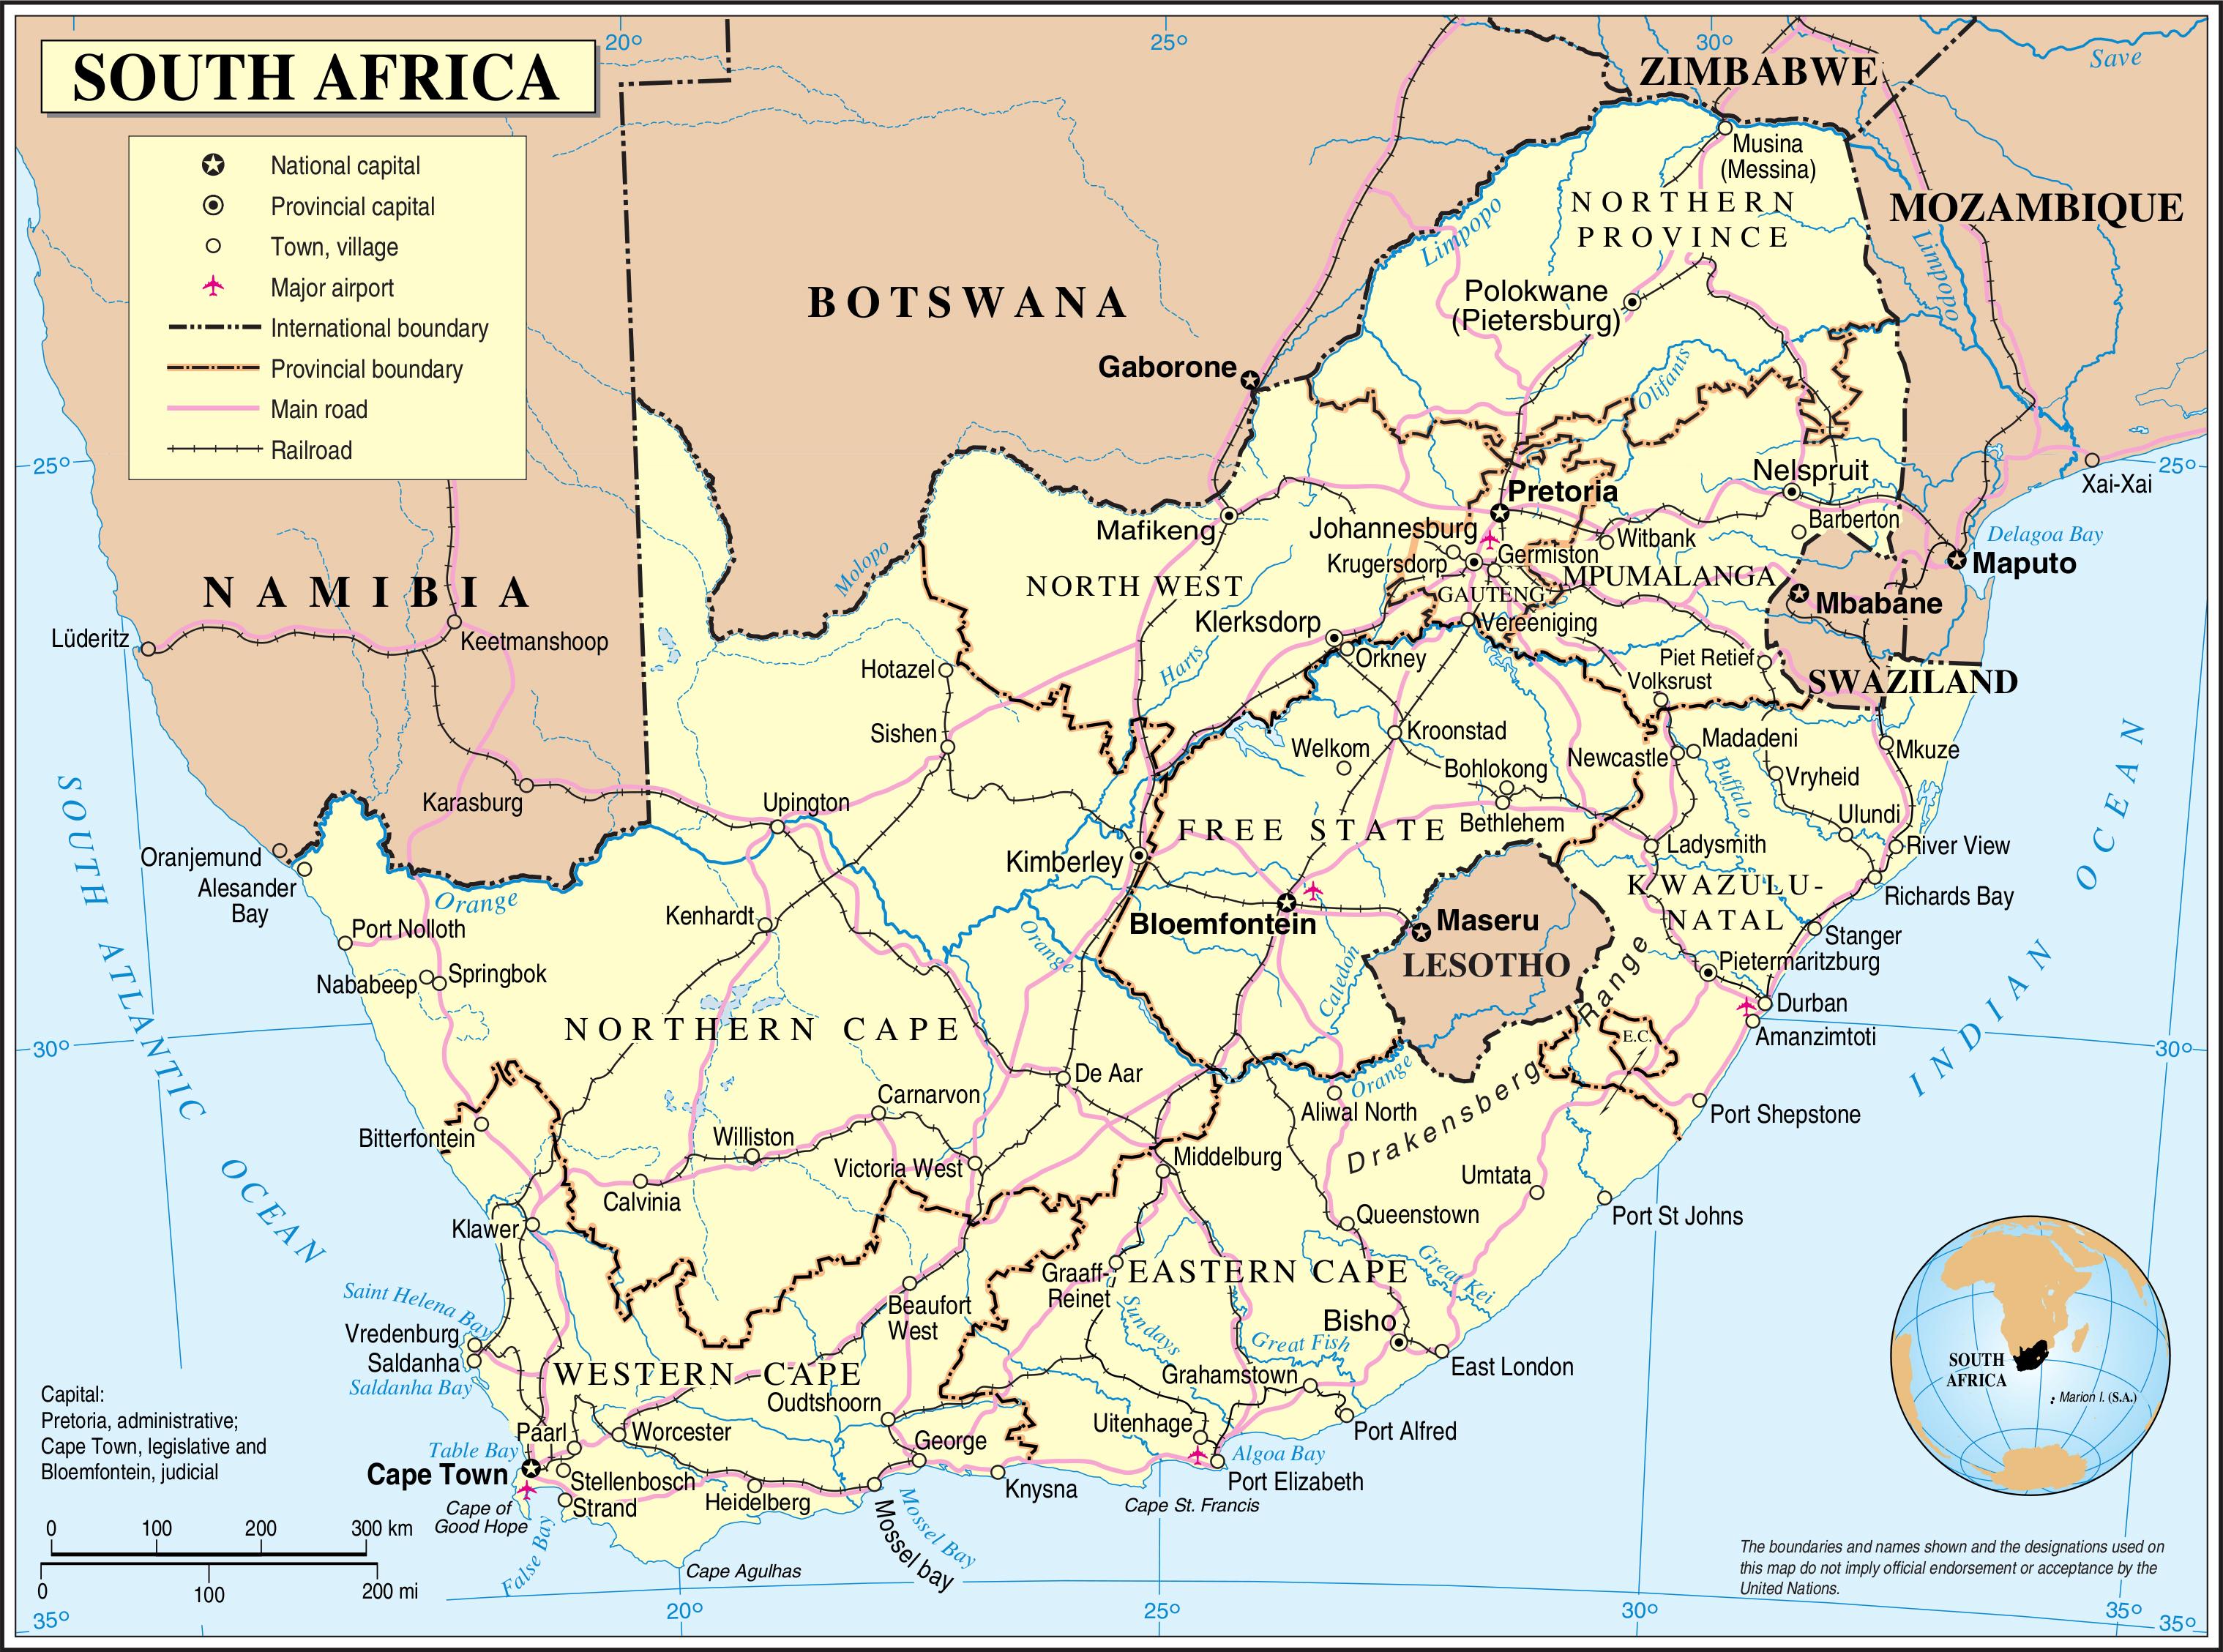 South Africa Map 